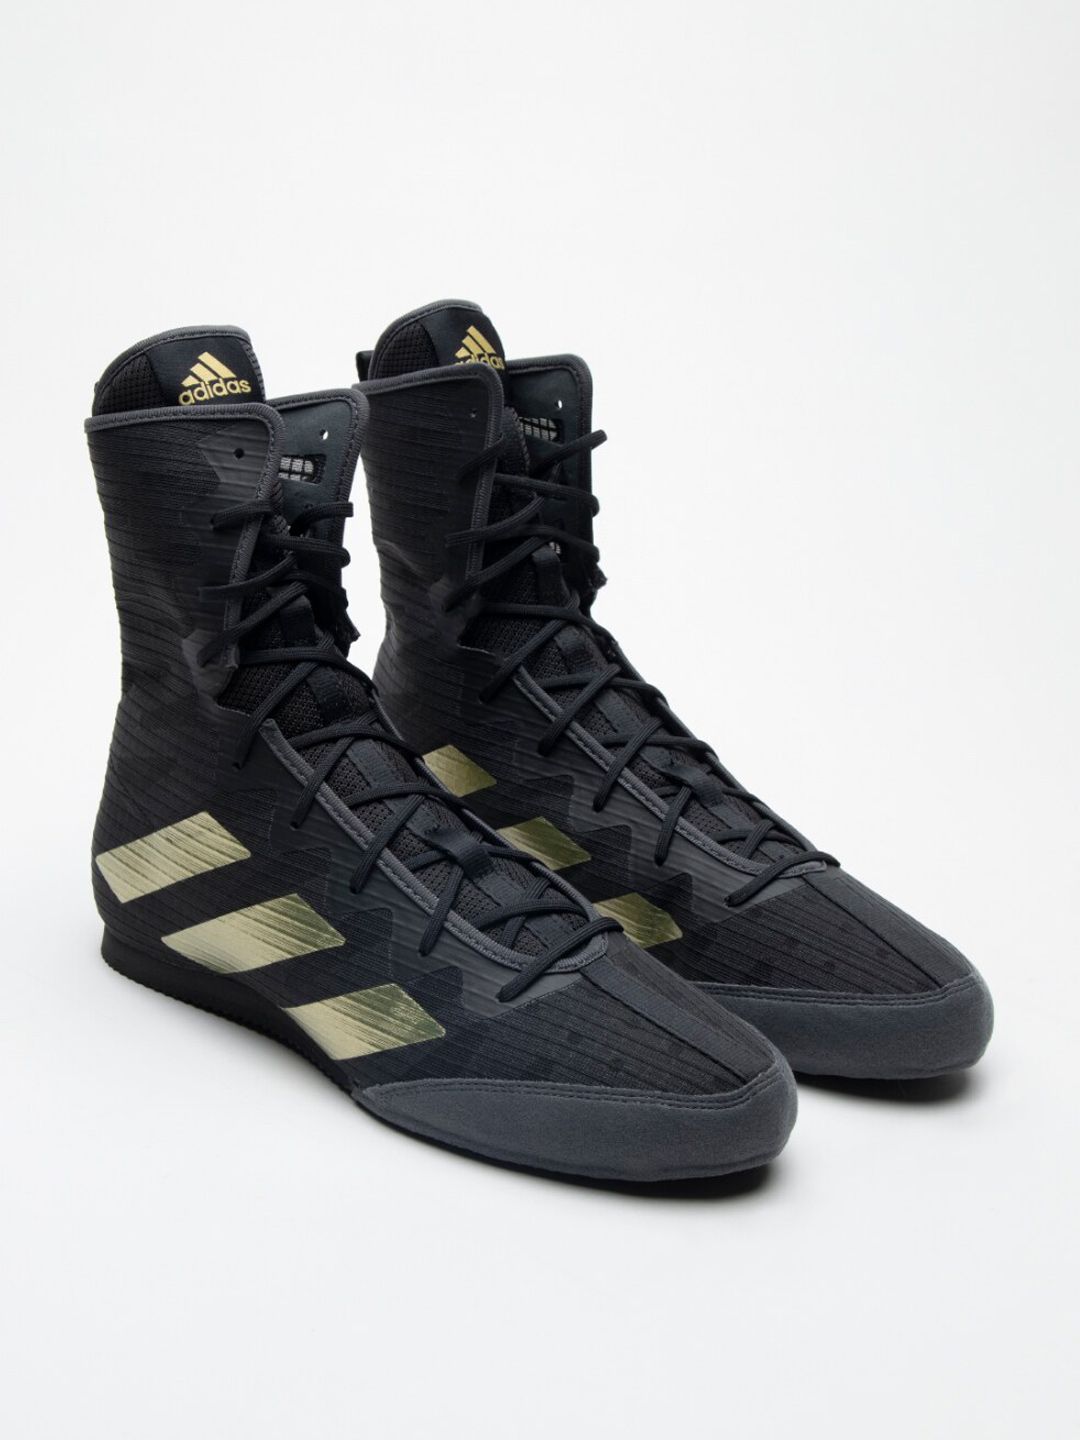 ADIDAS Unisex Black Sports Shoes Price in India